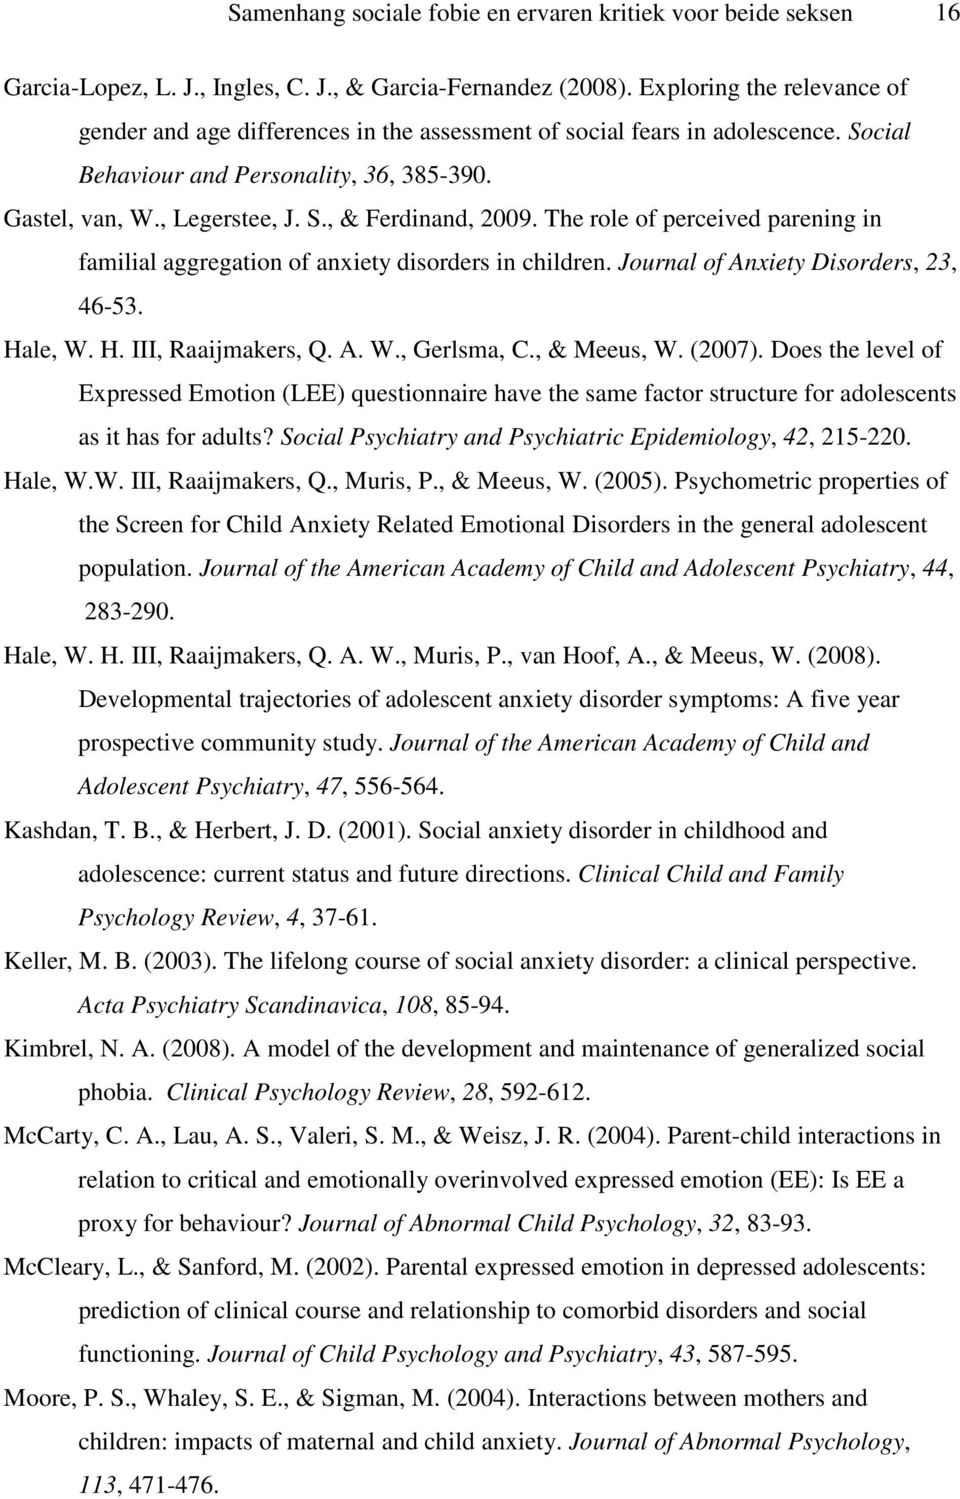 The role of perceived parening in familial aggregation of anxiety disorders in children. Journal of Anxiety Disorders, 23, 46-53. Hale, W. H. III, Raaijmakers, Q. A. W., Gerlsma, C., & Meeus, W.